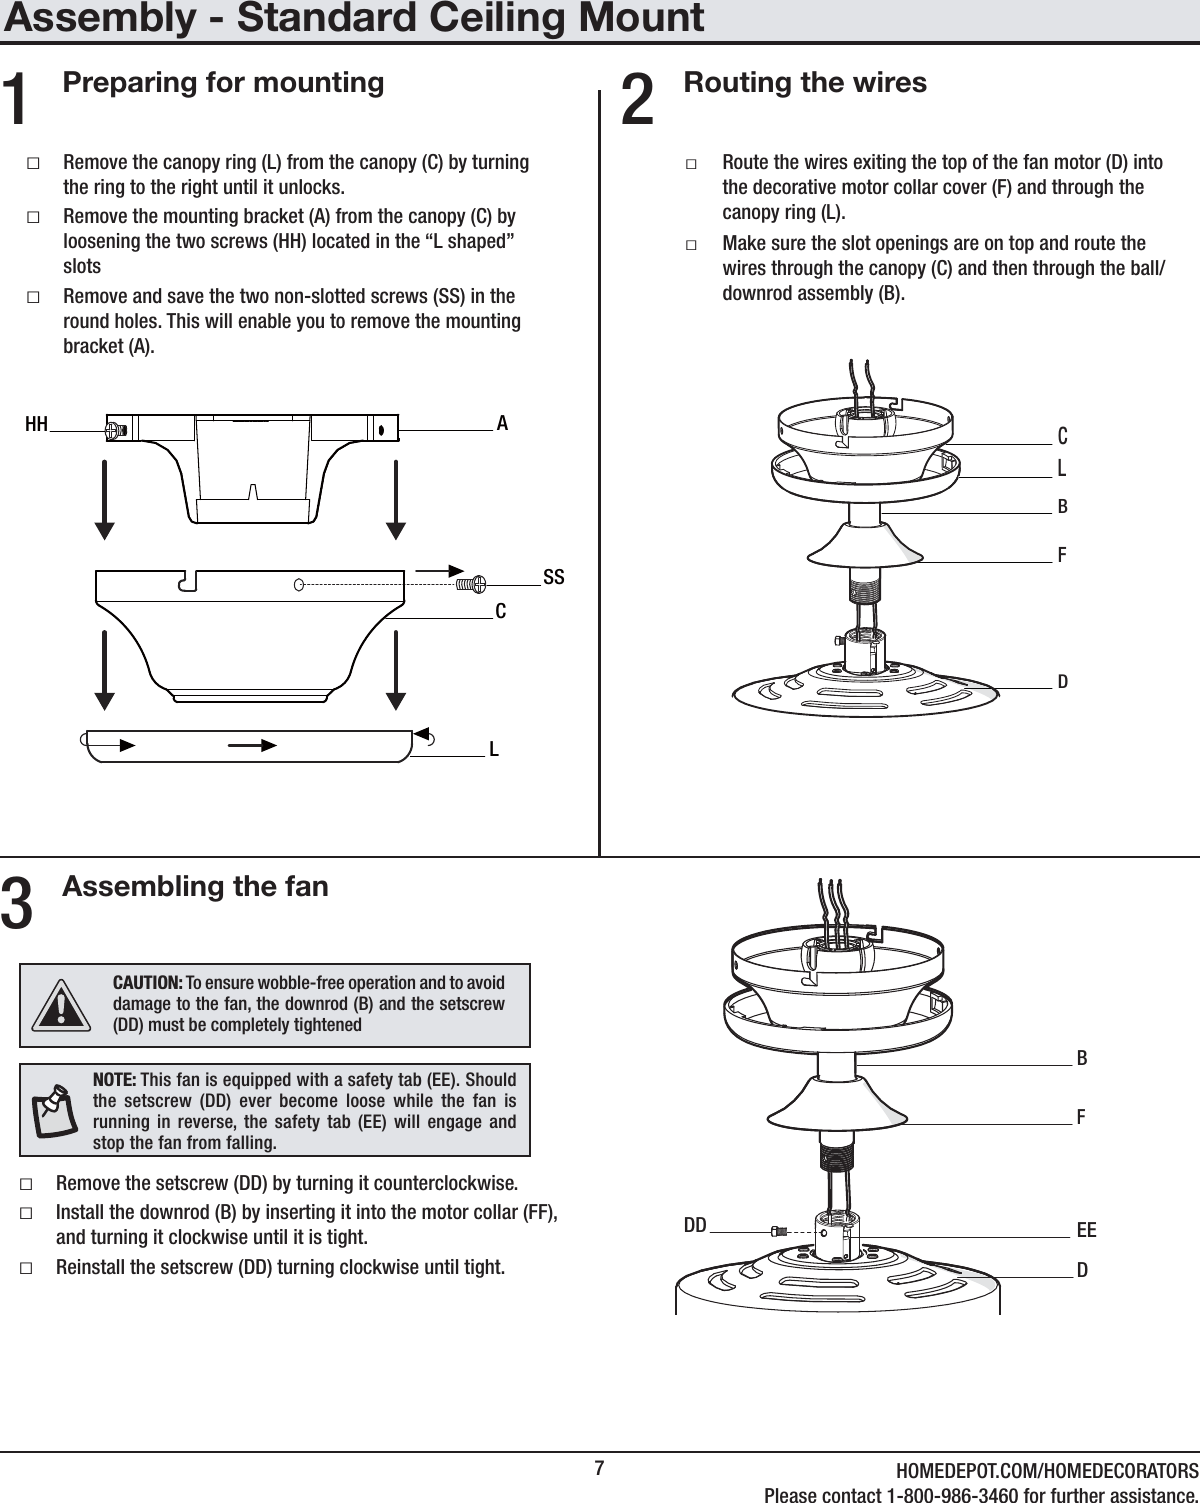 7HOMEDEPOT.COM/HOMEDECORATORSPlease contact 1-800-986-3460 for further assistance.Assembly - Standard Ceiling MountRouting the wiresAssembling the fanPreparing for mounting ƑRemove the canopy ring (L) from the canopy (C) by turning the ring to the right until it unlocks. ƑRemove the mounting bracket (A) from the canopy (C) by loosening the two screws (HH) located in the “L shaped” slots ƑRemove and save the two non-slotted screws (SS) in the round holes. This will enable you to remove the mounting bracket (A). ƑRoute the wires exiting the top of the fan motor (D) into the decorative motor collar cover (F) and through the canopy ring (L). ƑMake sure the slot openings are on top and route the wires through the canopy (C) and then through the ball/downrod assembly (B).231   CASSLHHCDF BLDF EEDDB ƑRemove the setscrew (DD) by turning it counterclockwise. ƑInstall the downrod (B) by inserting it into the motor collar (FF), and turning it clockwise until it is tight.  ƑReinstall the setscrew (DD) turning clockwise until tight.NOTE: This fan is equipped with a safety tab (EE). Should the setscrew (DD) ever become loose while the fan is running in reverse, the safety tab (EE) will engage and stop the fan from falling.CAUTION: To ensure wobble-free operation and to avoid damage to the fan, the downrod (B) and the setscrew (DD) must be completely tightened